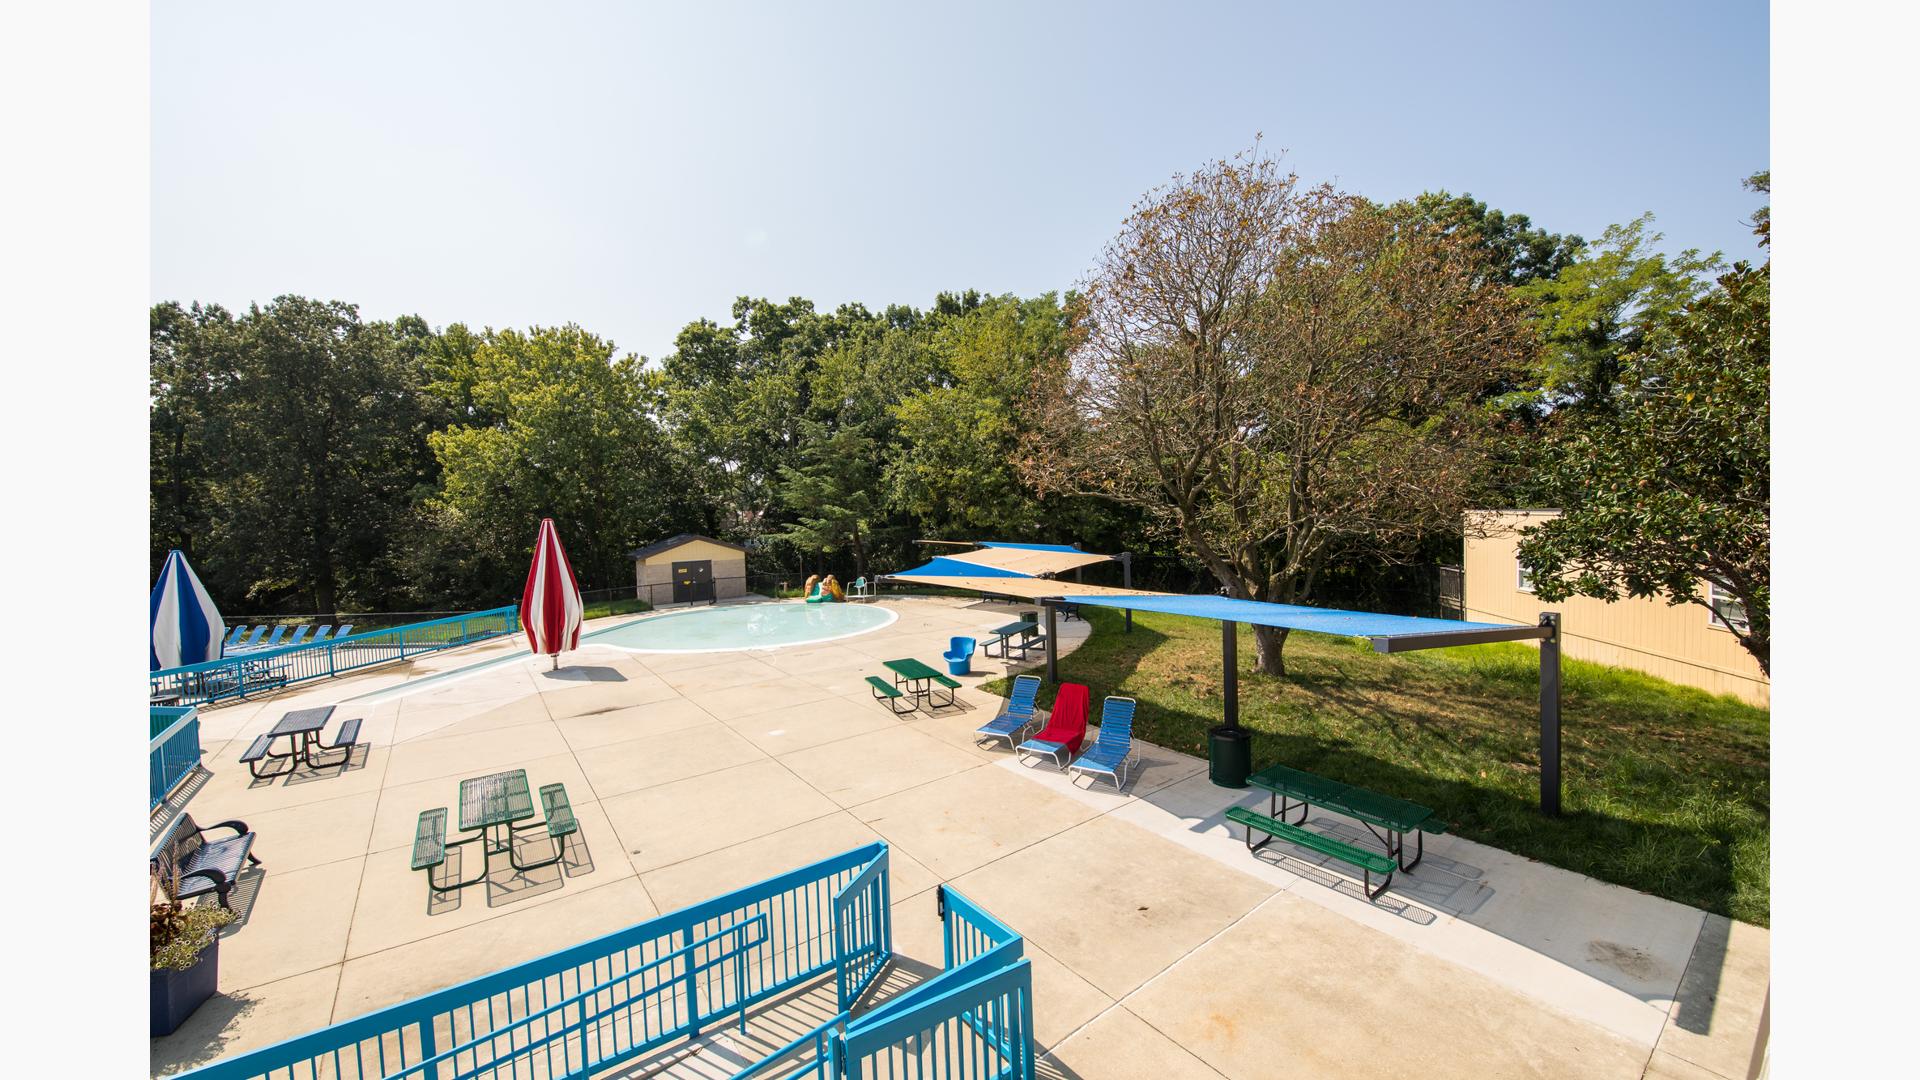 Swimming pool area with picnic tables, lounge chairs covered by tan and blue canopy shade structures. 